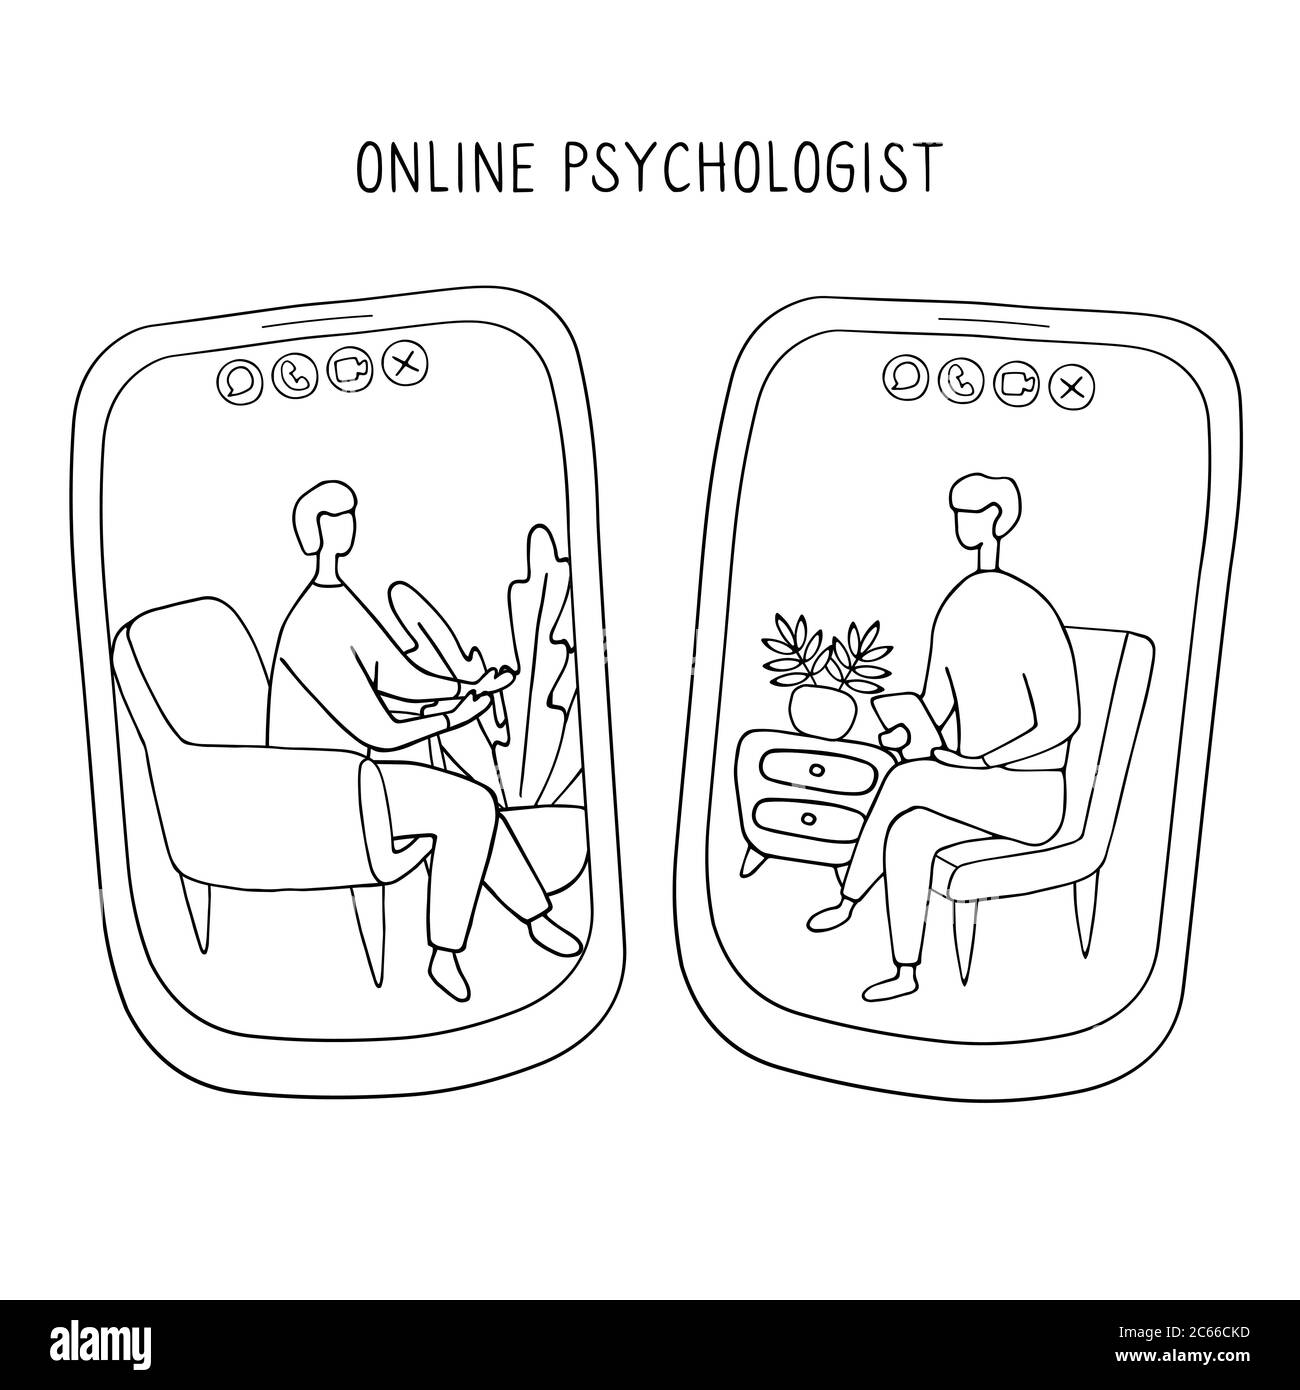 Doctor and patient communicate by video call. Online psychiatrist concept. Two people on screens of smartphones are talking to each other. Hand drawn Stock Vector